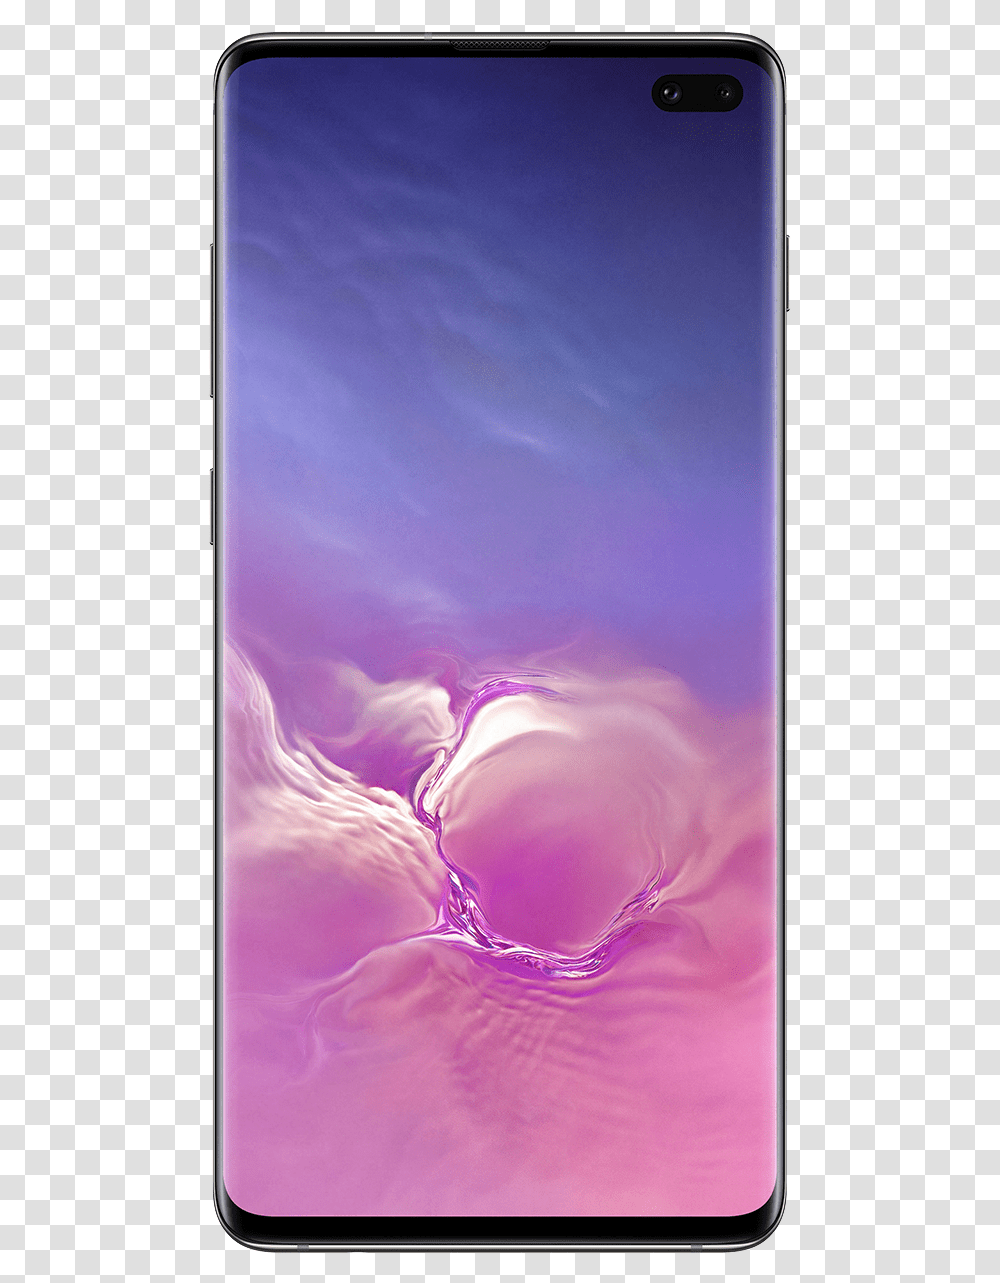 Samsung Galaxy S10 Ceramic Black Front Image, Mobile Phone, Electronics, Cell Phone, Purple Transparent Png